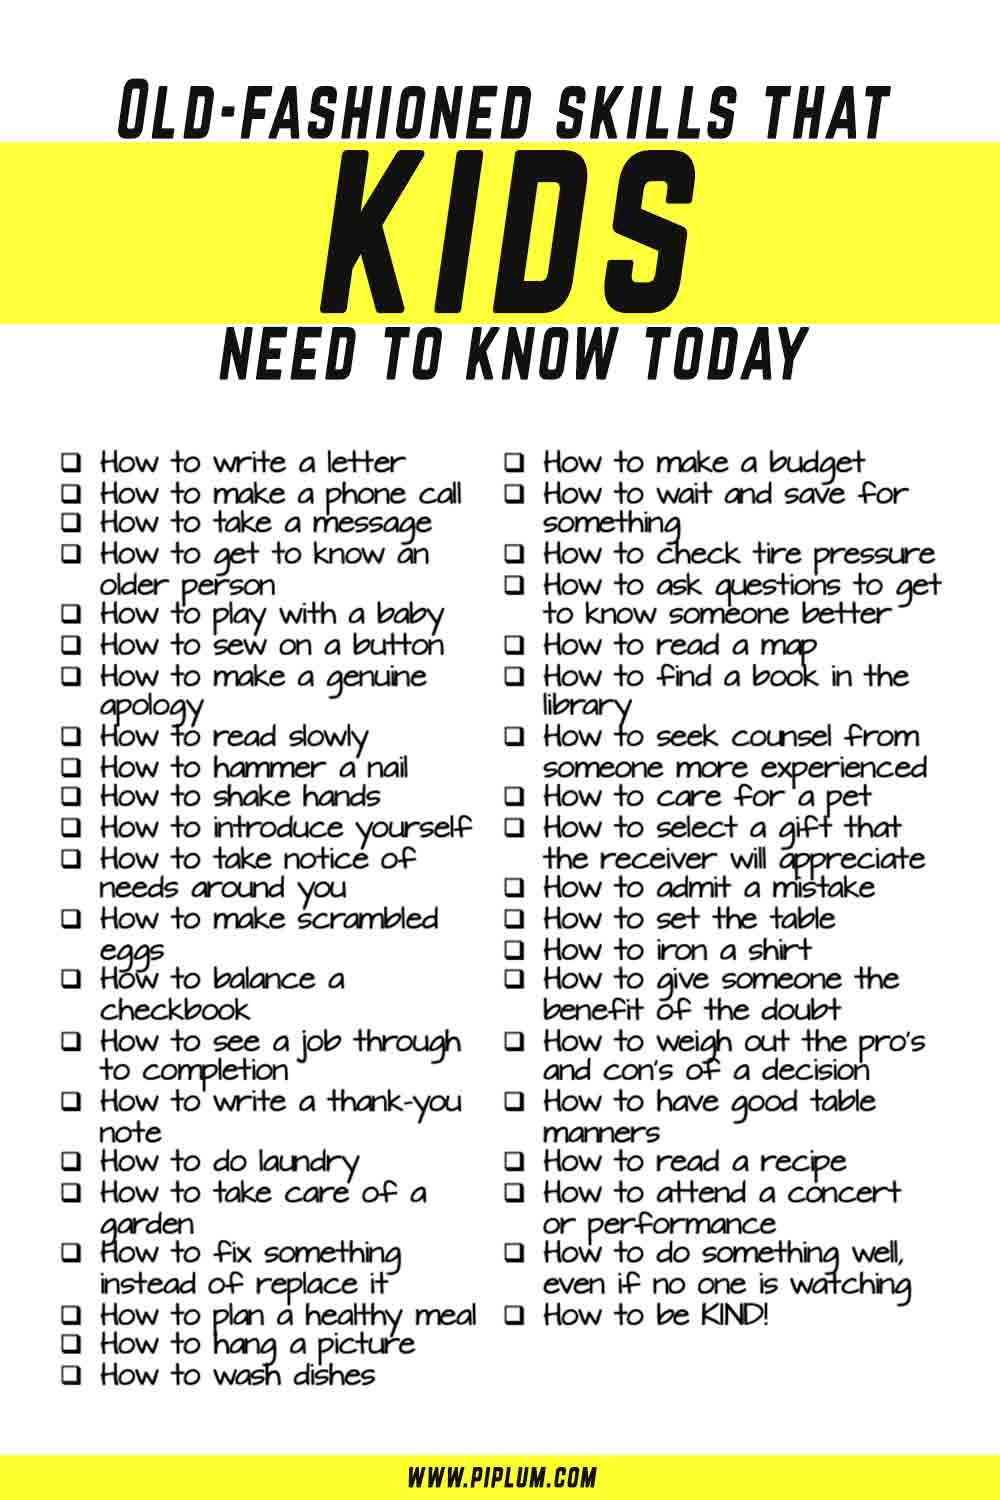 Life-skills-that-kids-need-today-Inspirational-parenting-poster 